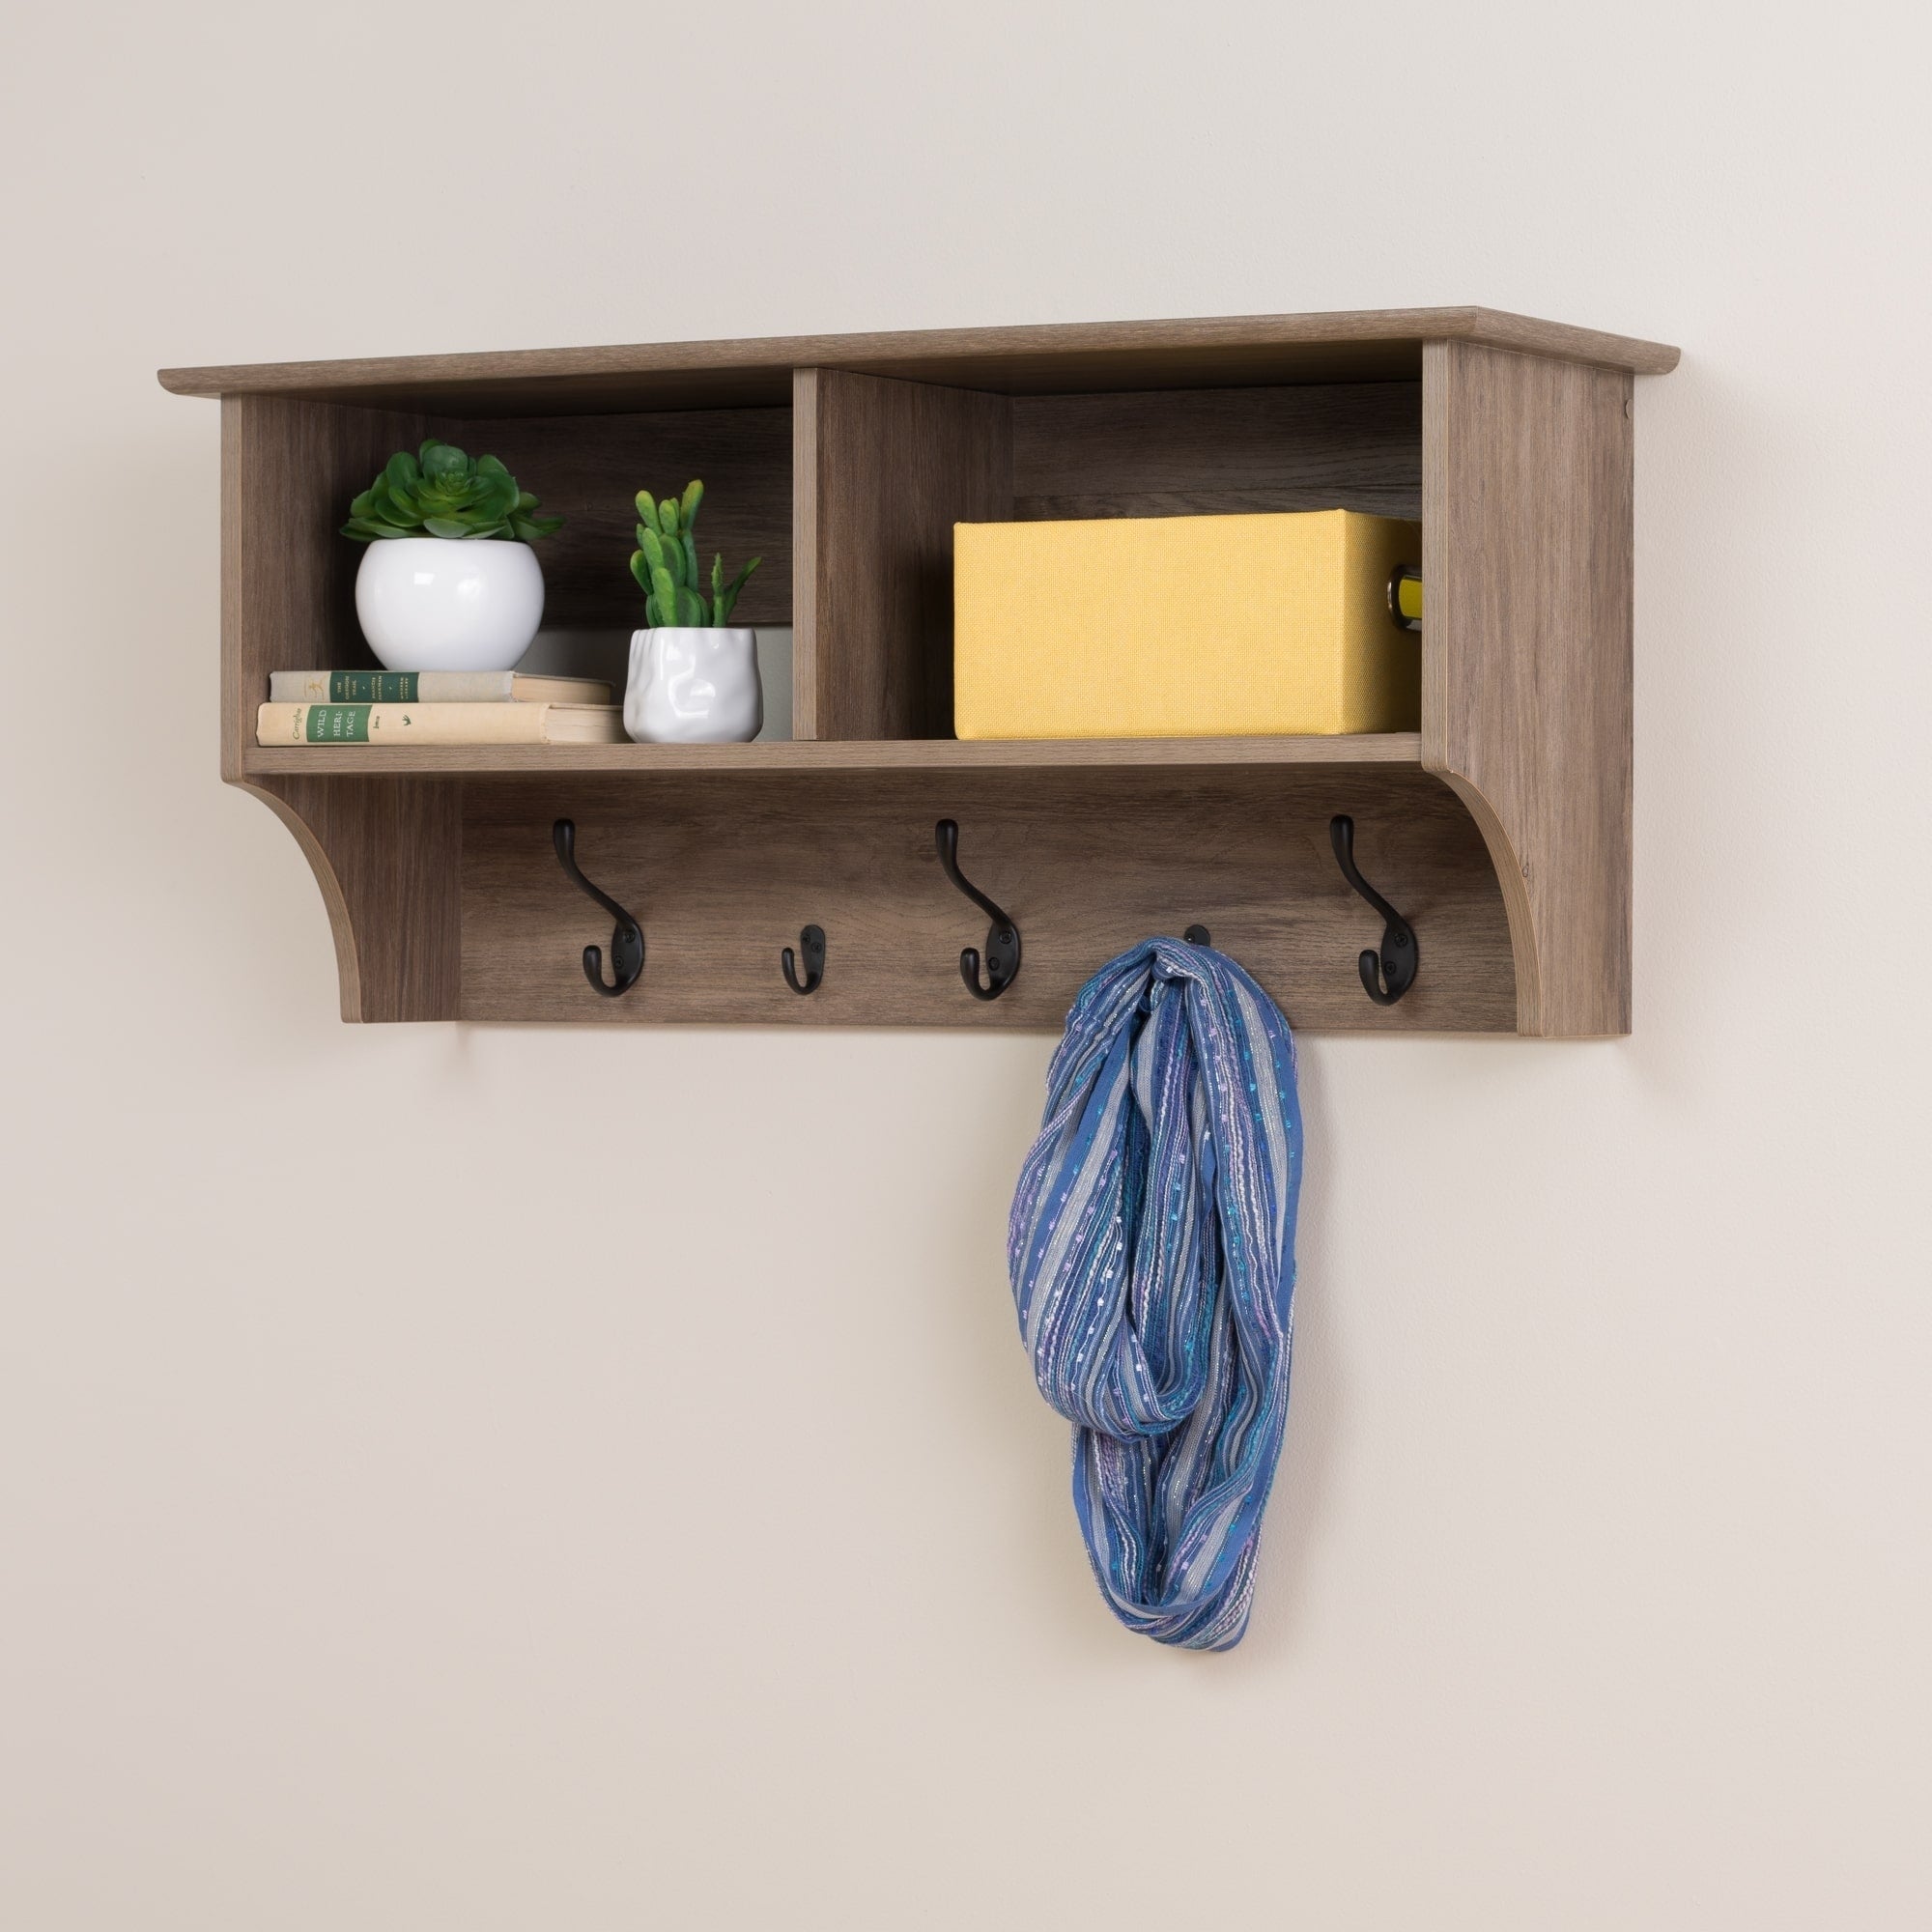 prepac drifted grey wood inch wide floating entryway shelf with bench white unit for sky box fireplace back panel wall hangers ideas cleat hanging system reclaimed open shelving